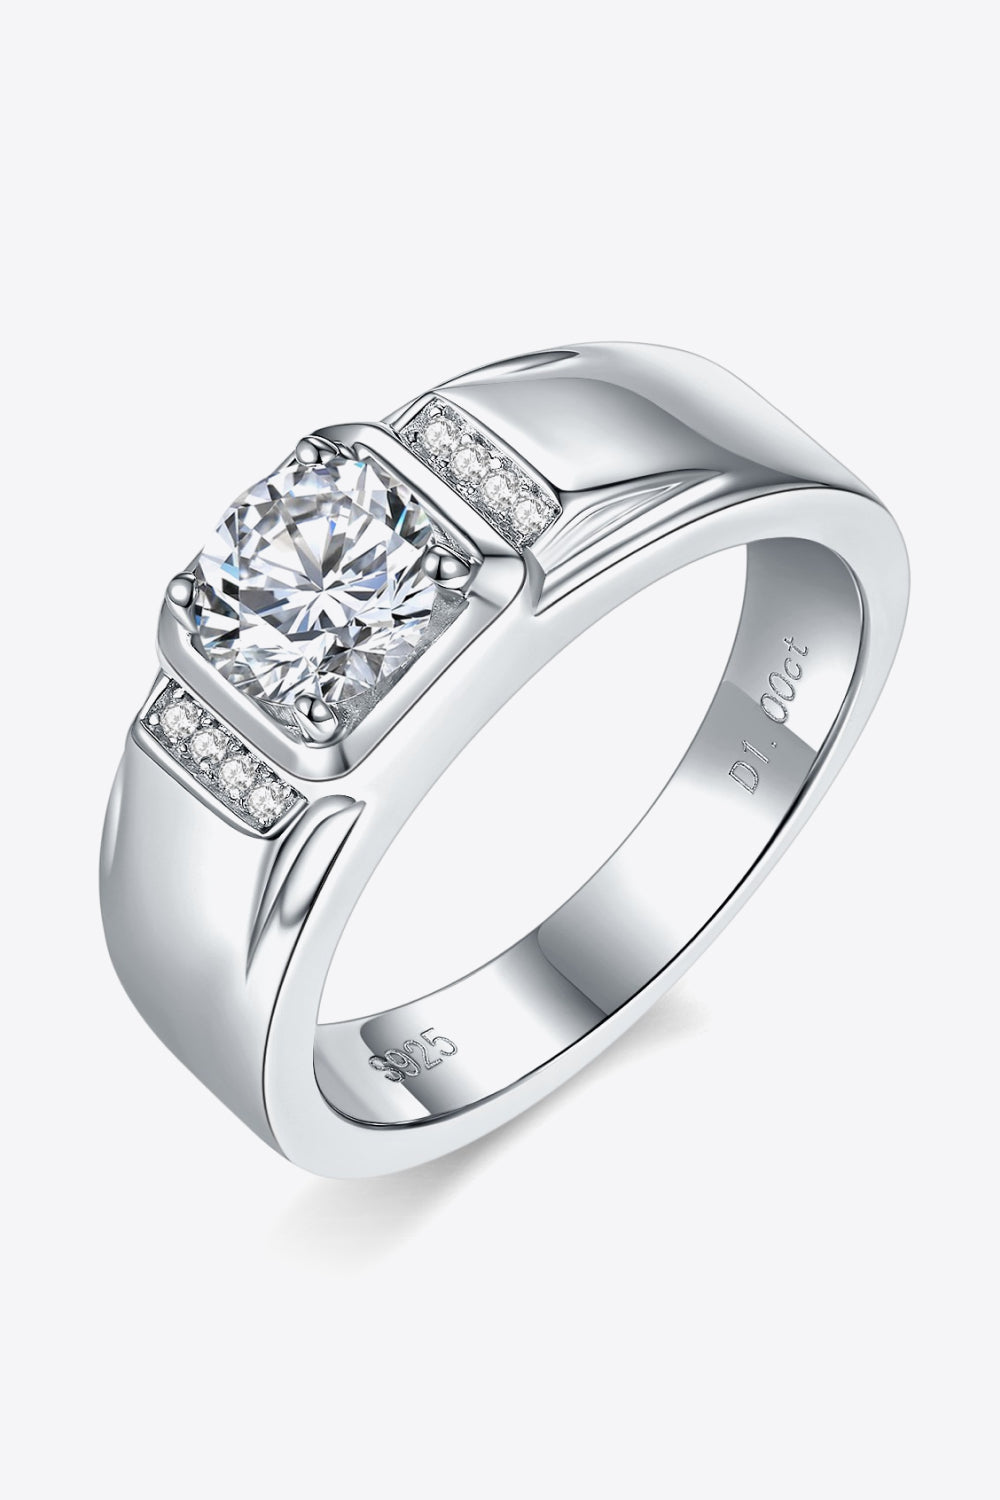 From The Heart 1 Carat Moissanite Ring - Ryzela